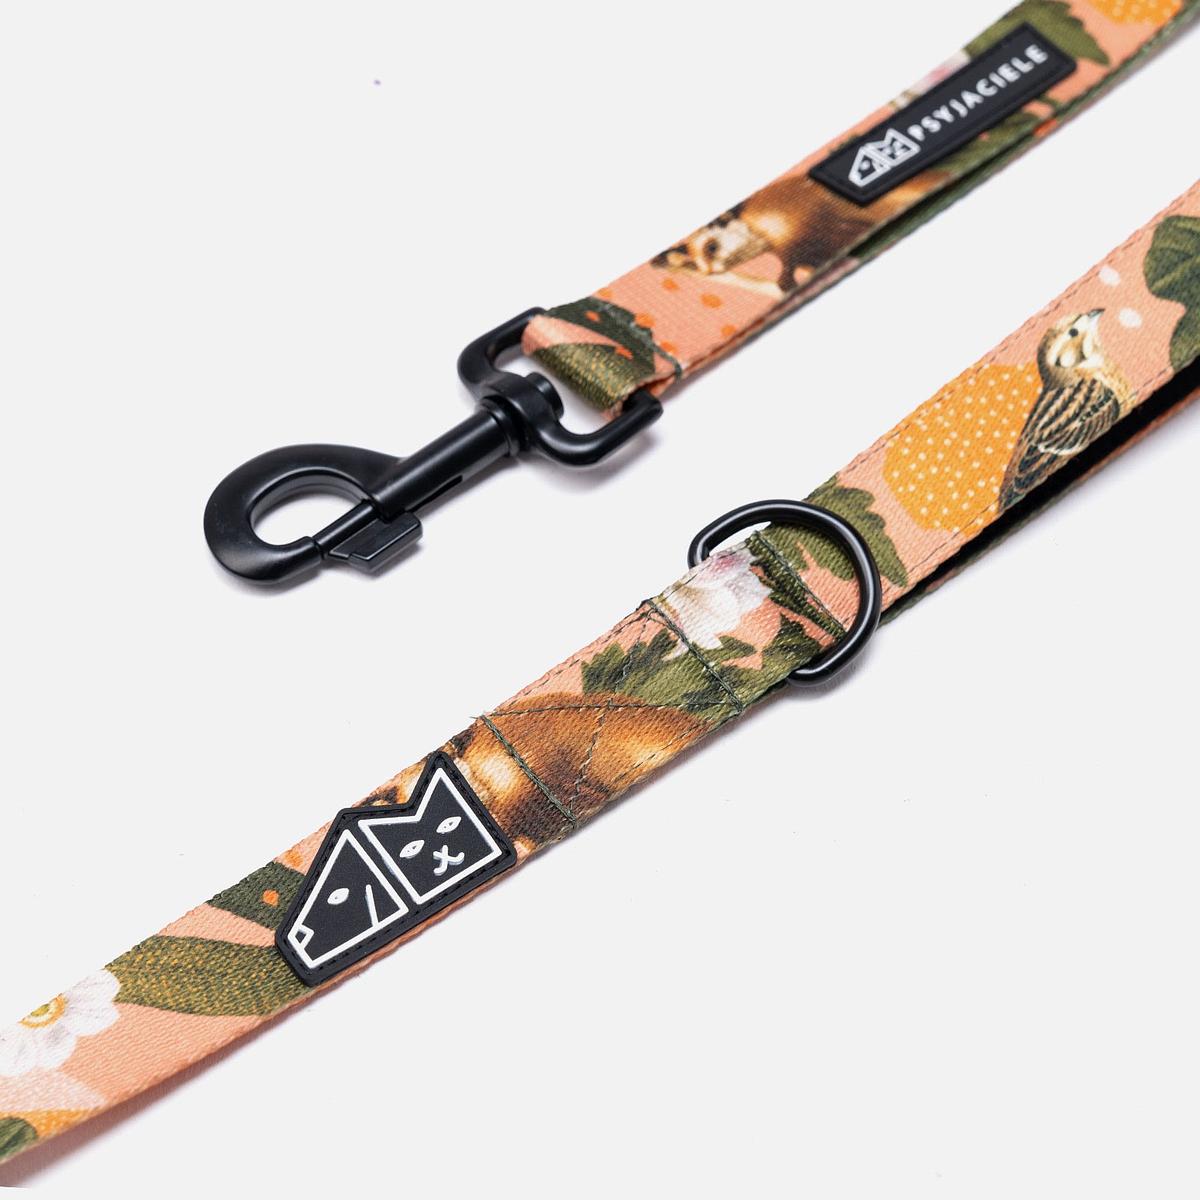 "Play with my nuts" city leash